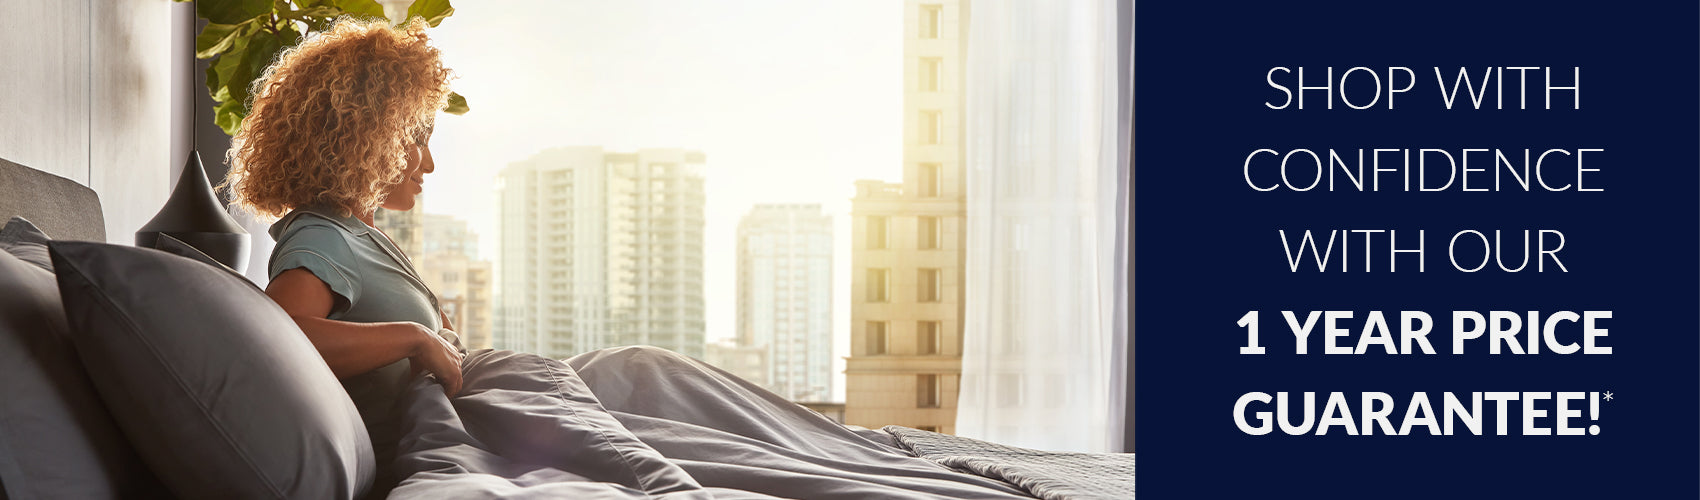 Shop with confidence with our 1 Year Price Guarantee. Woman relaxing on bed overlooking a city view